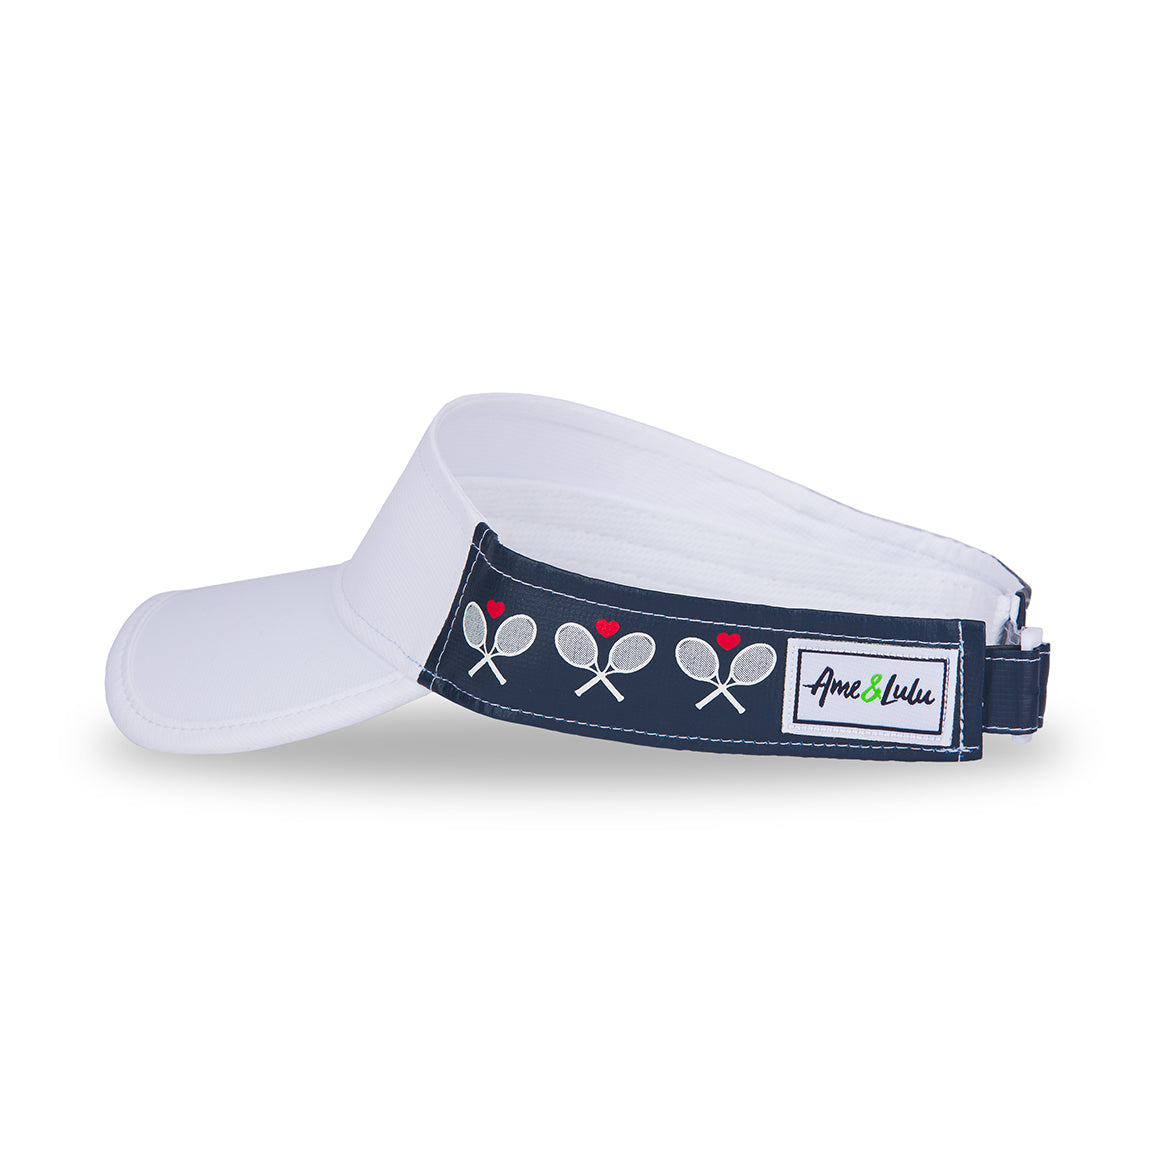 Side view of crossed racquets head in the game visor. Front of visor is white and sides are navy with white crossed racquets and red hearts printed.